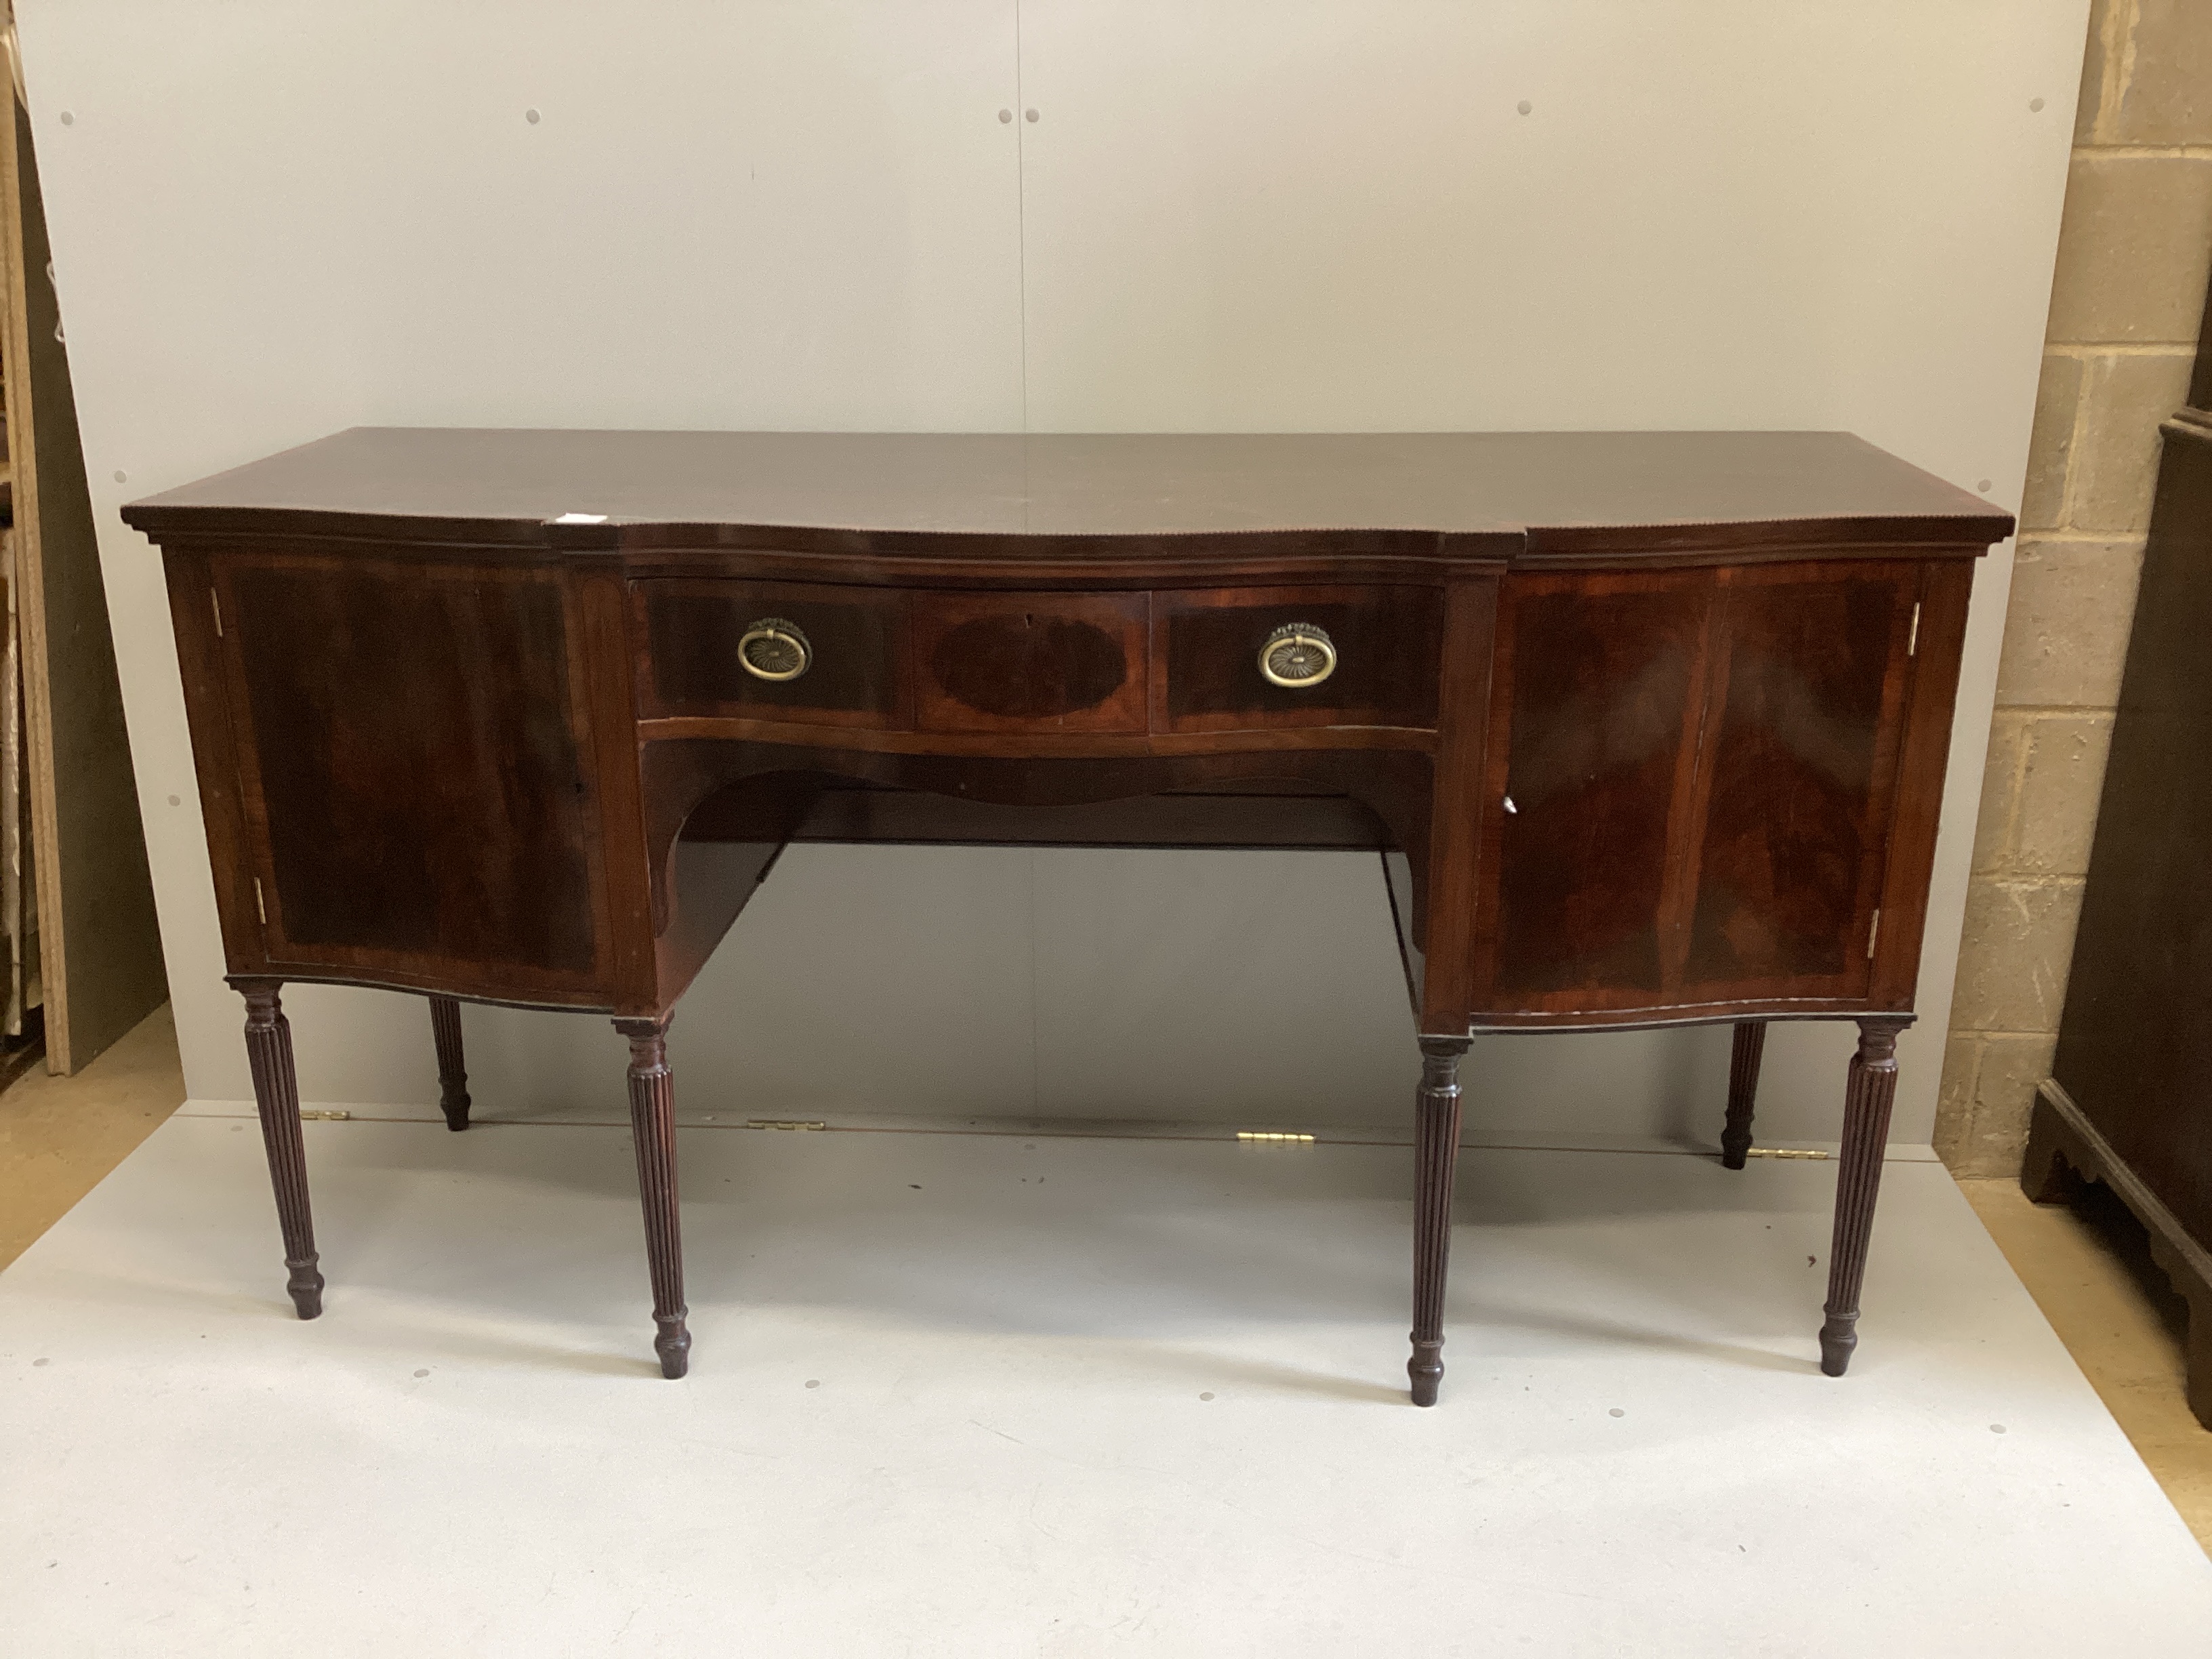 An Edwardian George III style Maple & Co banded mahogany serpentine sideboard, width 182cm, depth 69cm, height 97cm